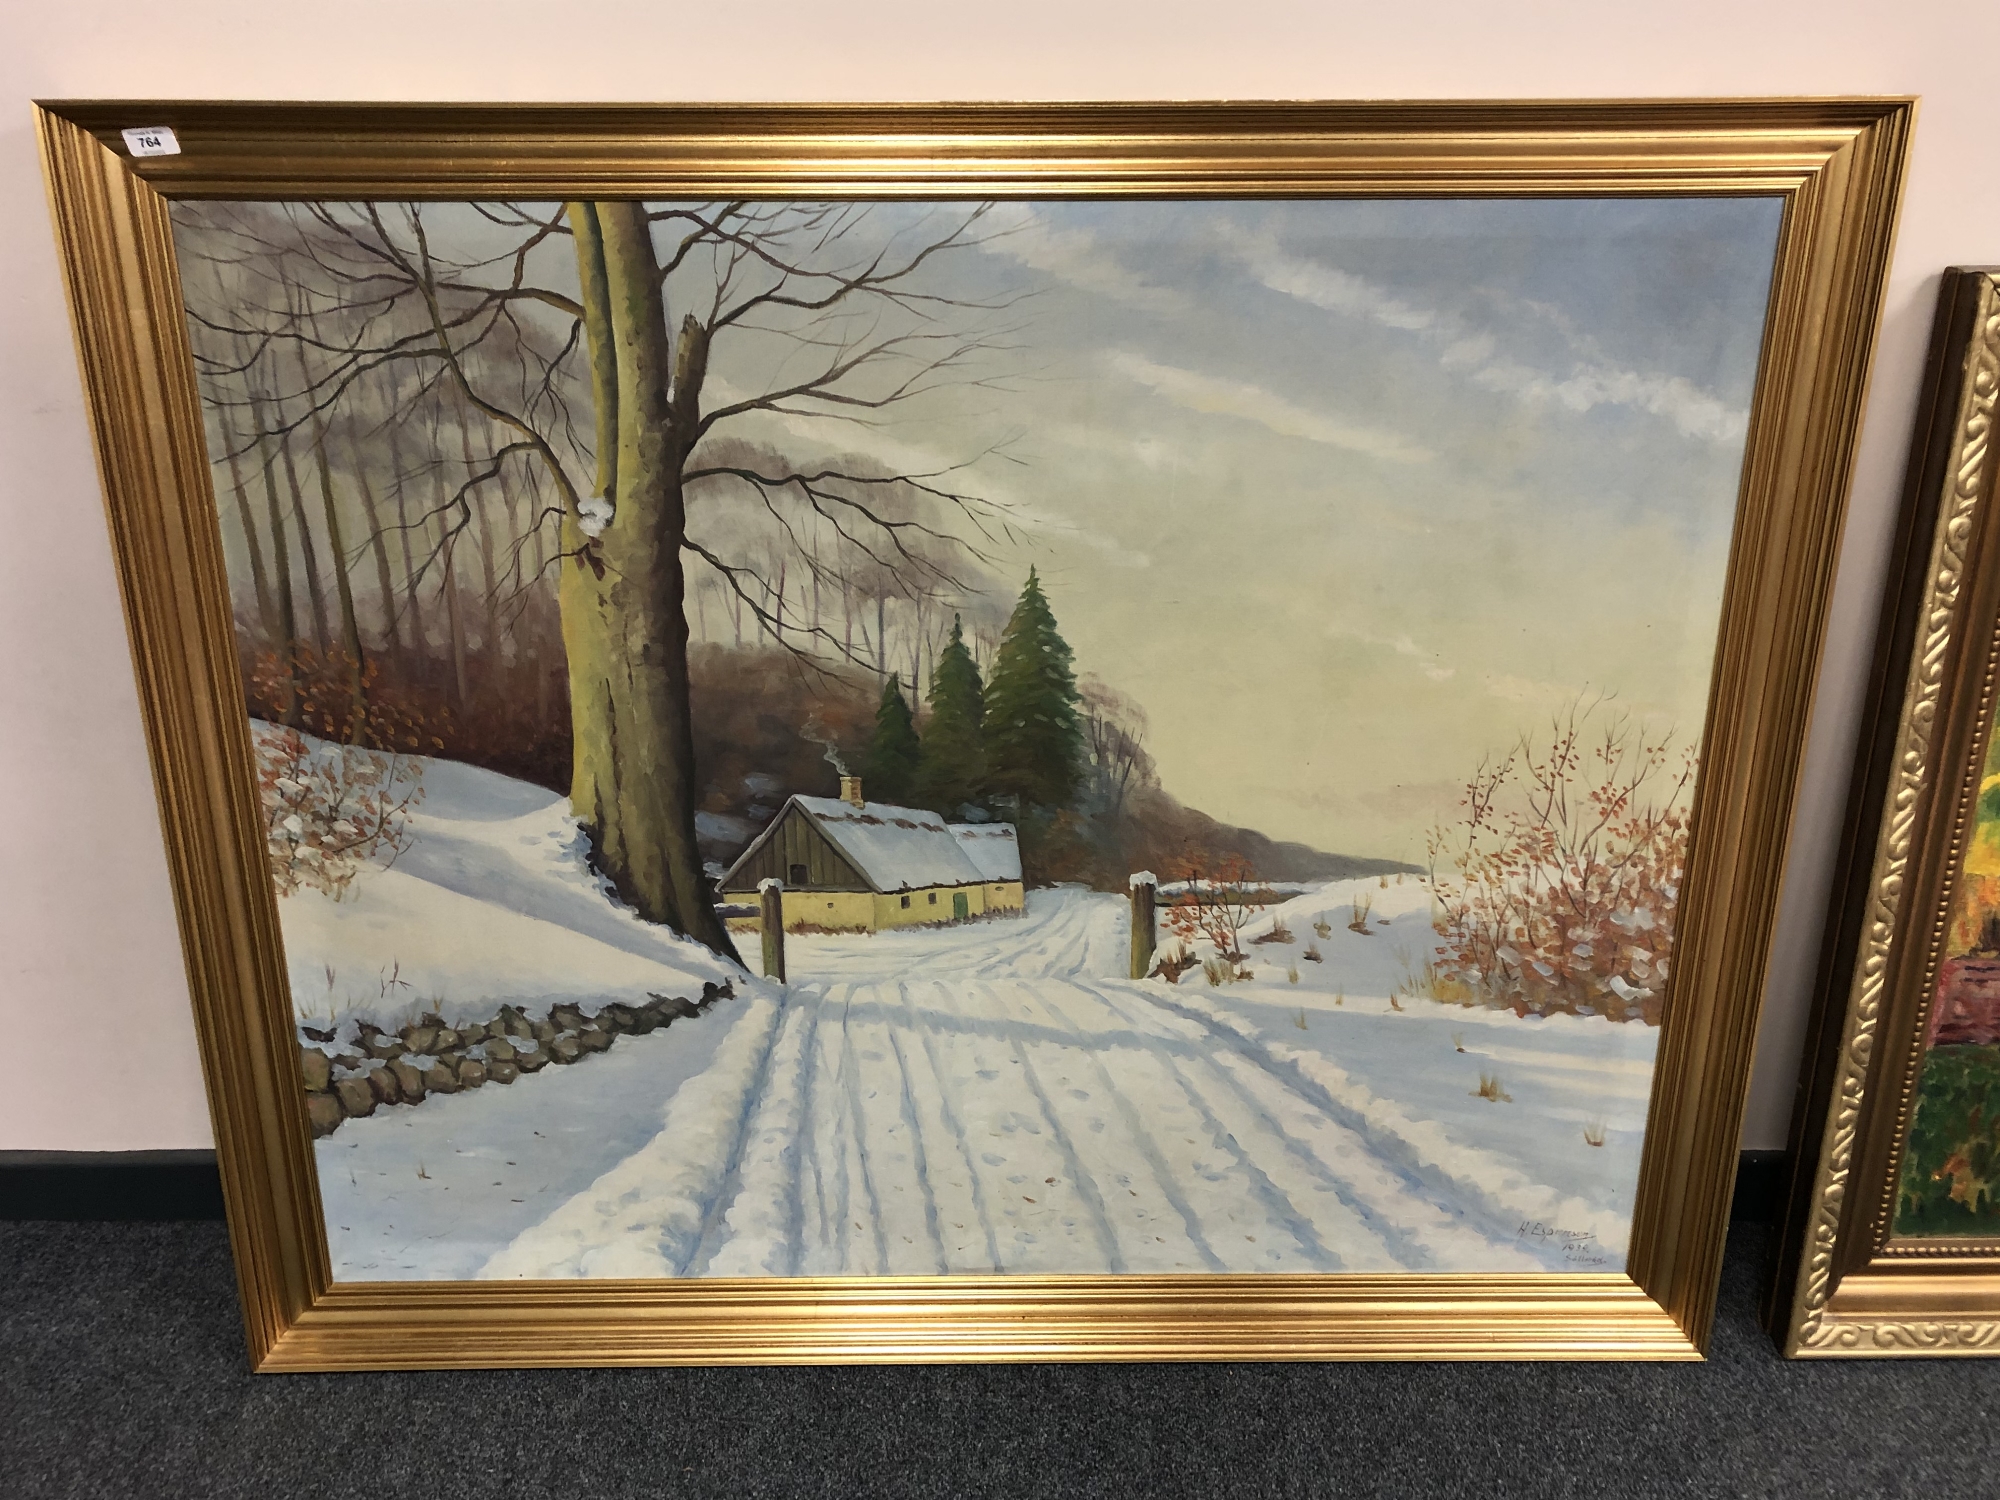 H. Espensen : Snowed in cottage by a forest, oil-on-canvas, in gilt frame, 96cm by 120cm.